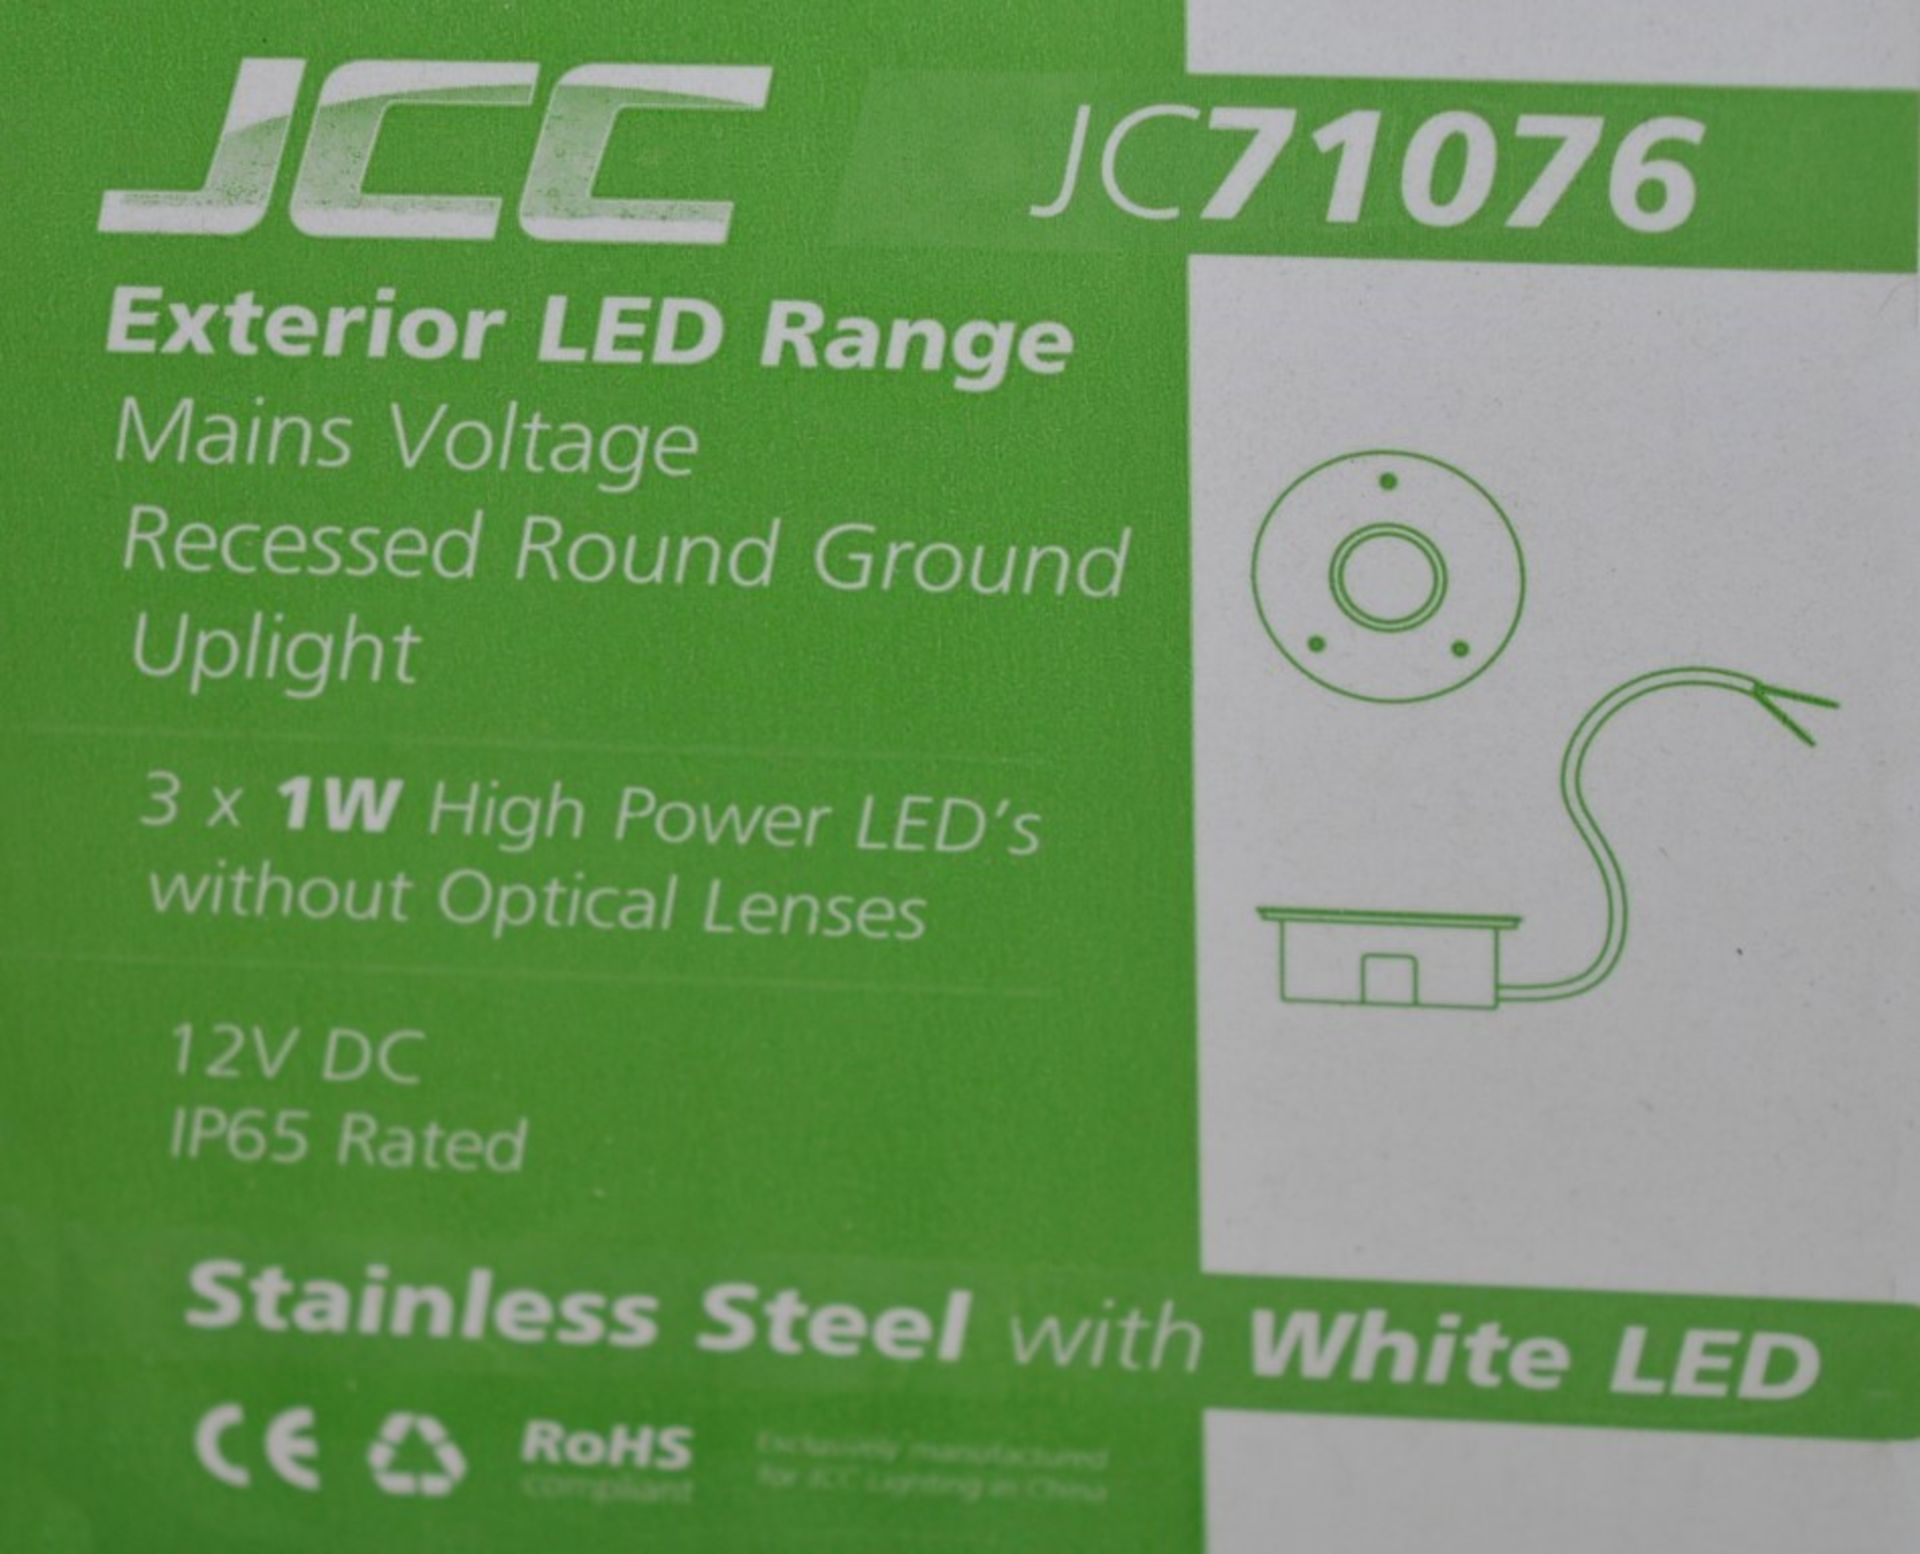 6 x JCC Lighting Exterior LED Mains Voltage Recessed GROUND UPLIGHT Sets - Ideal For Patios or - Image 5 of 5